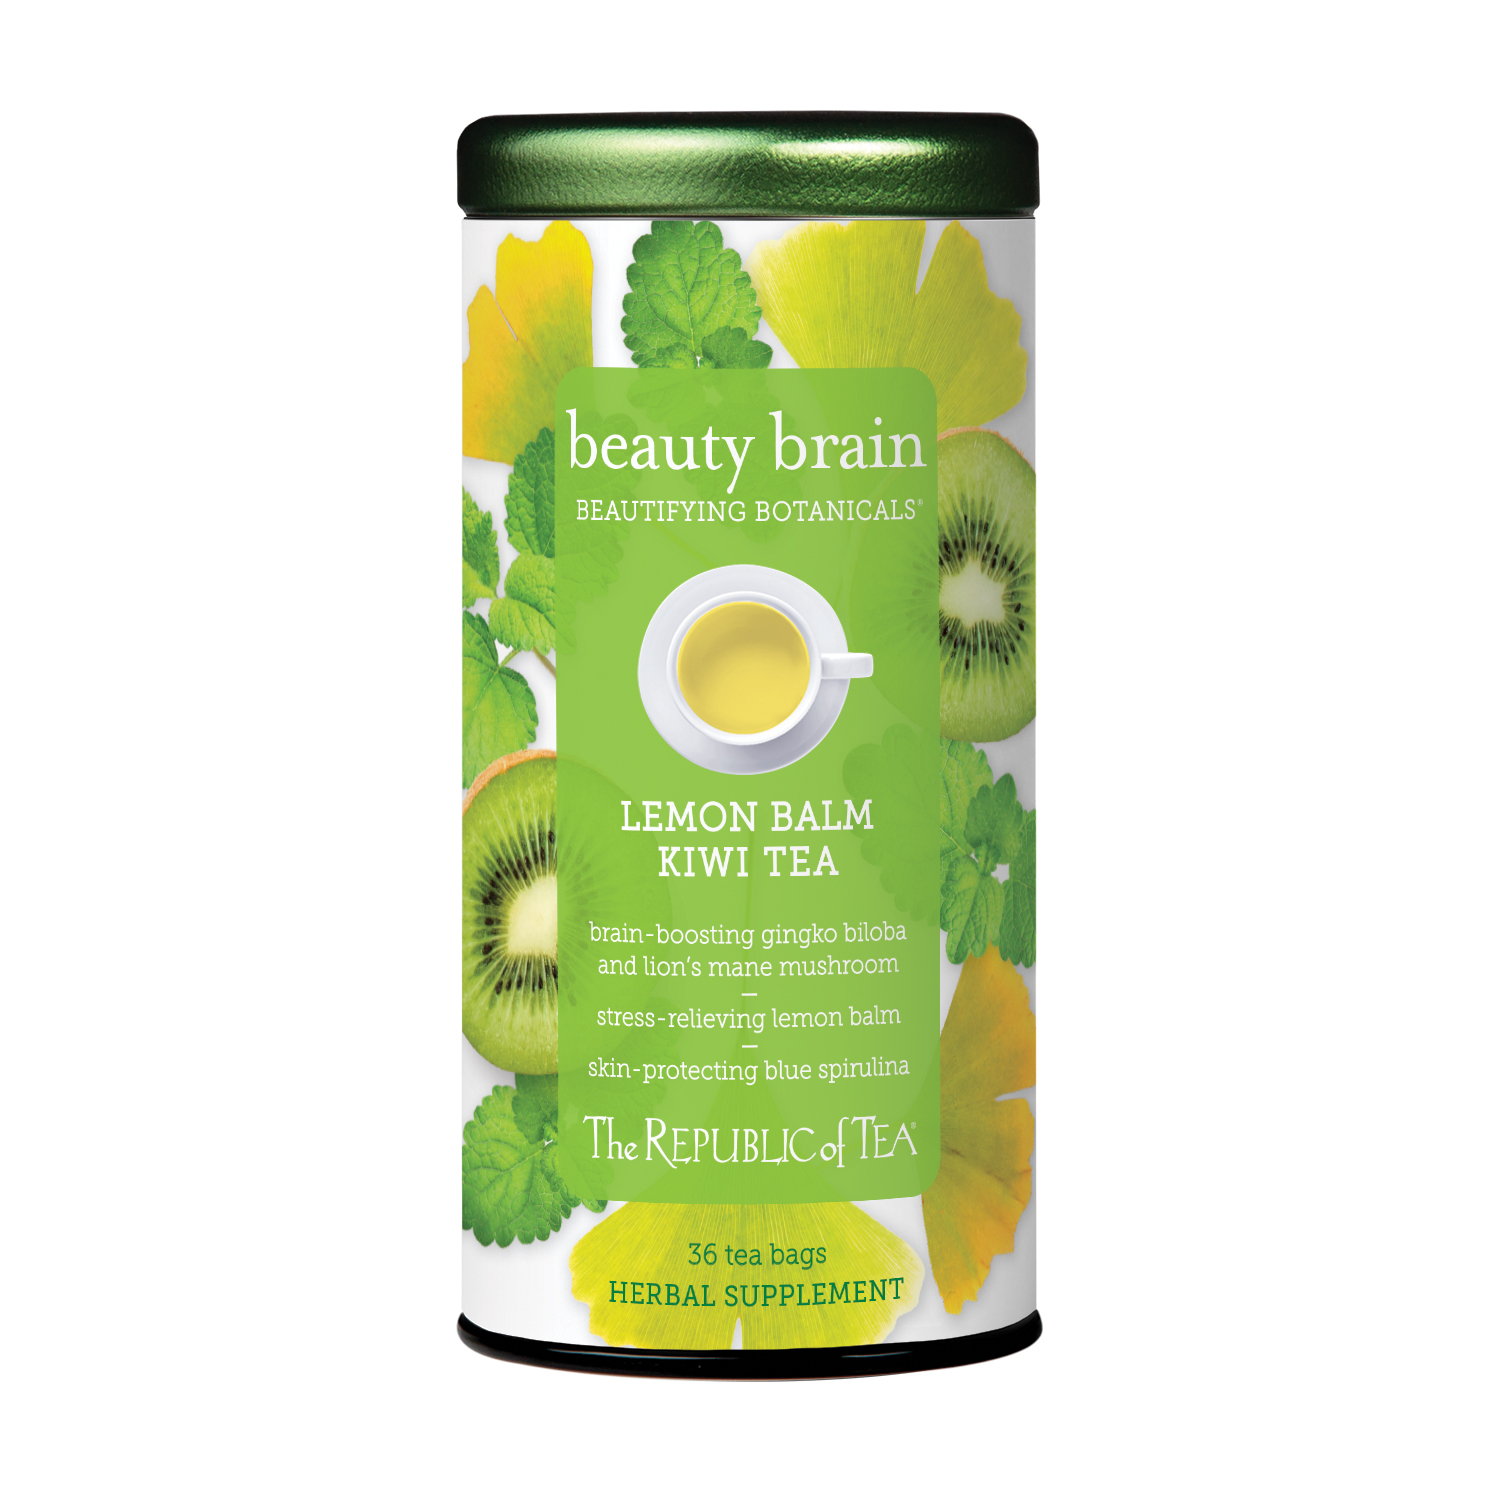 Beauty Brain™ features notes of sweet kiwi and calming lemon balm, which has potential to reduce stress and anxiety while boosting cognitive function.* Other cognition-supporting ingredients include Lion’s Mane mushroom, an adaptogen used in traditional Chinese medicine to support brain health, protect against dementia, and relieve mild symptoms of depression and anxiety*; and Ginkgo Biloba, which has also been used for thousands of years in traditional Chinese medicine to treat mental health conditions and fatigue.* 